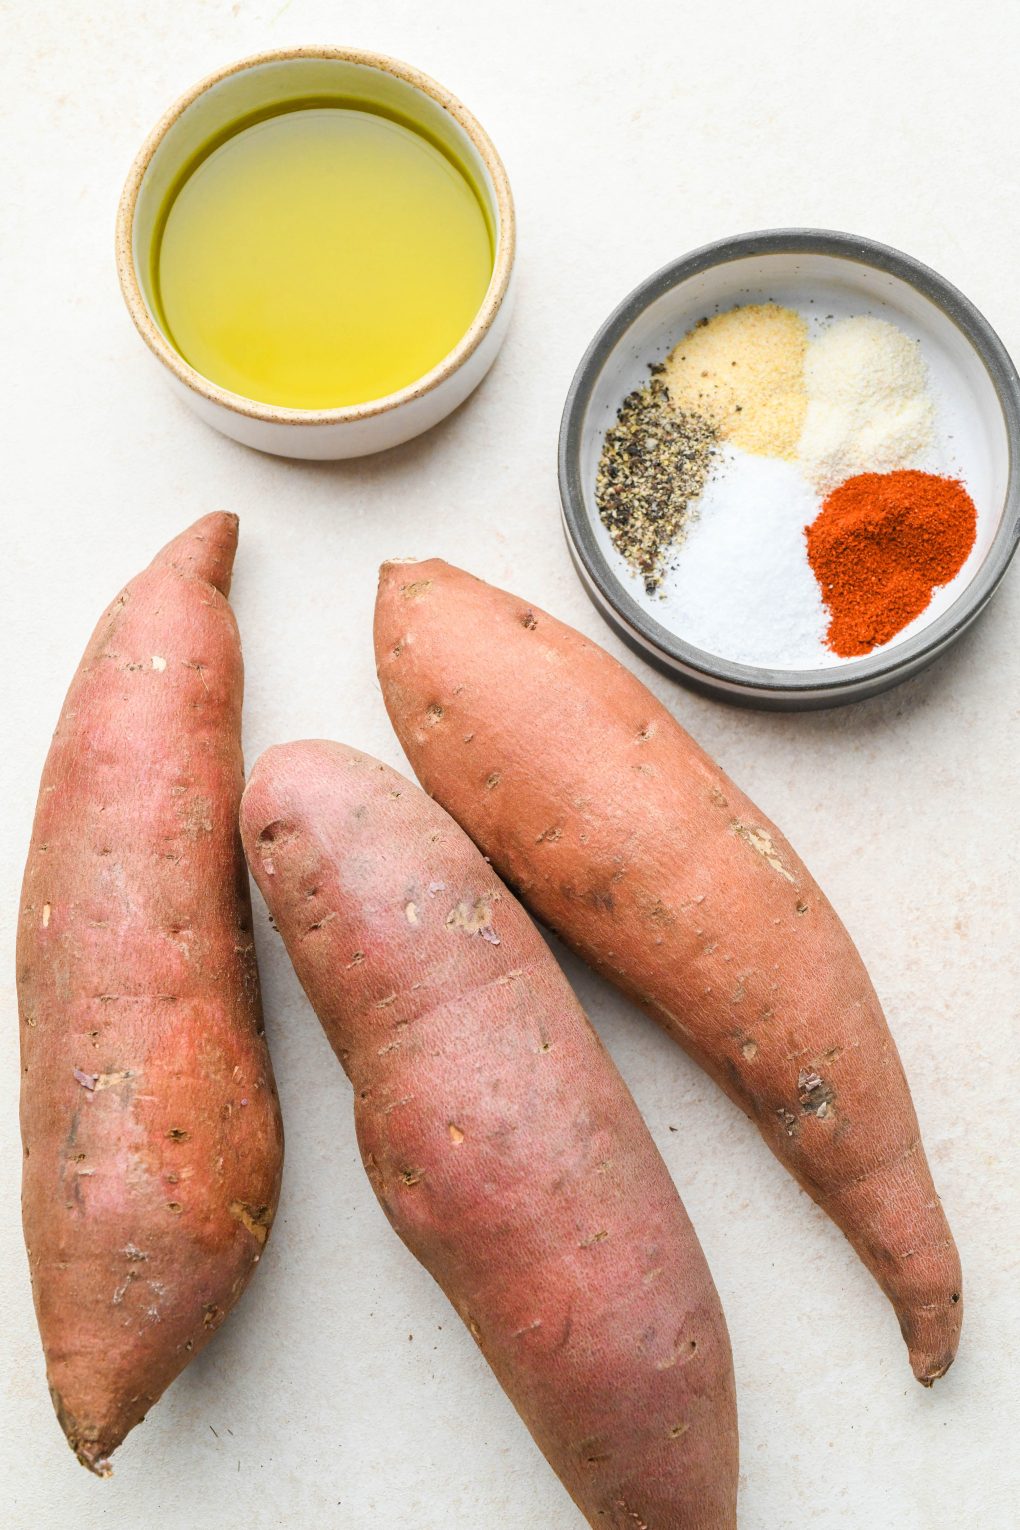 Ingredients for baked sweet potato fries on a light cream colored background.